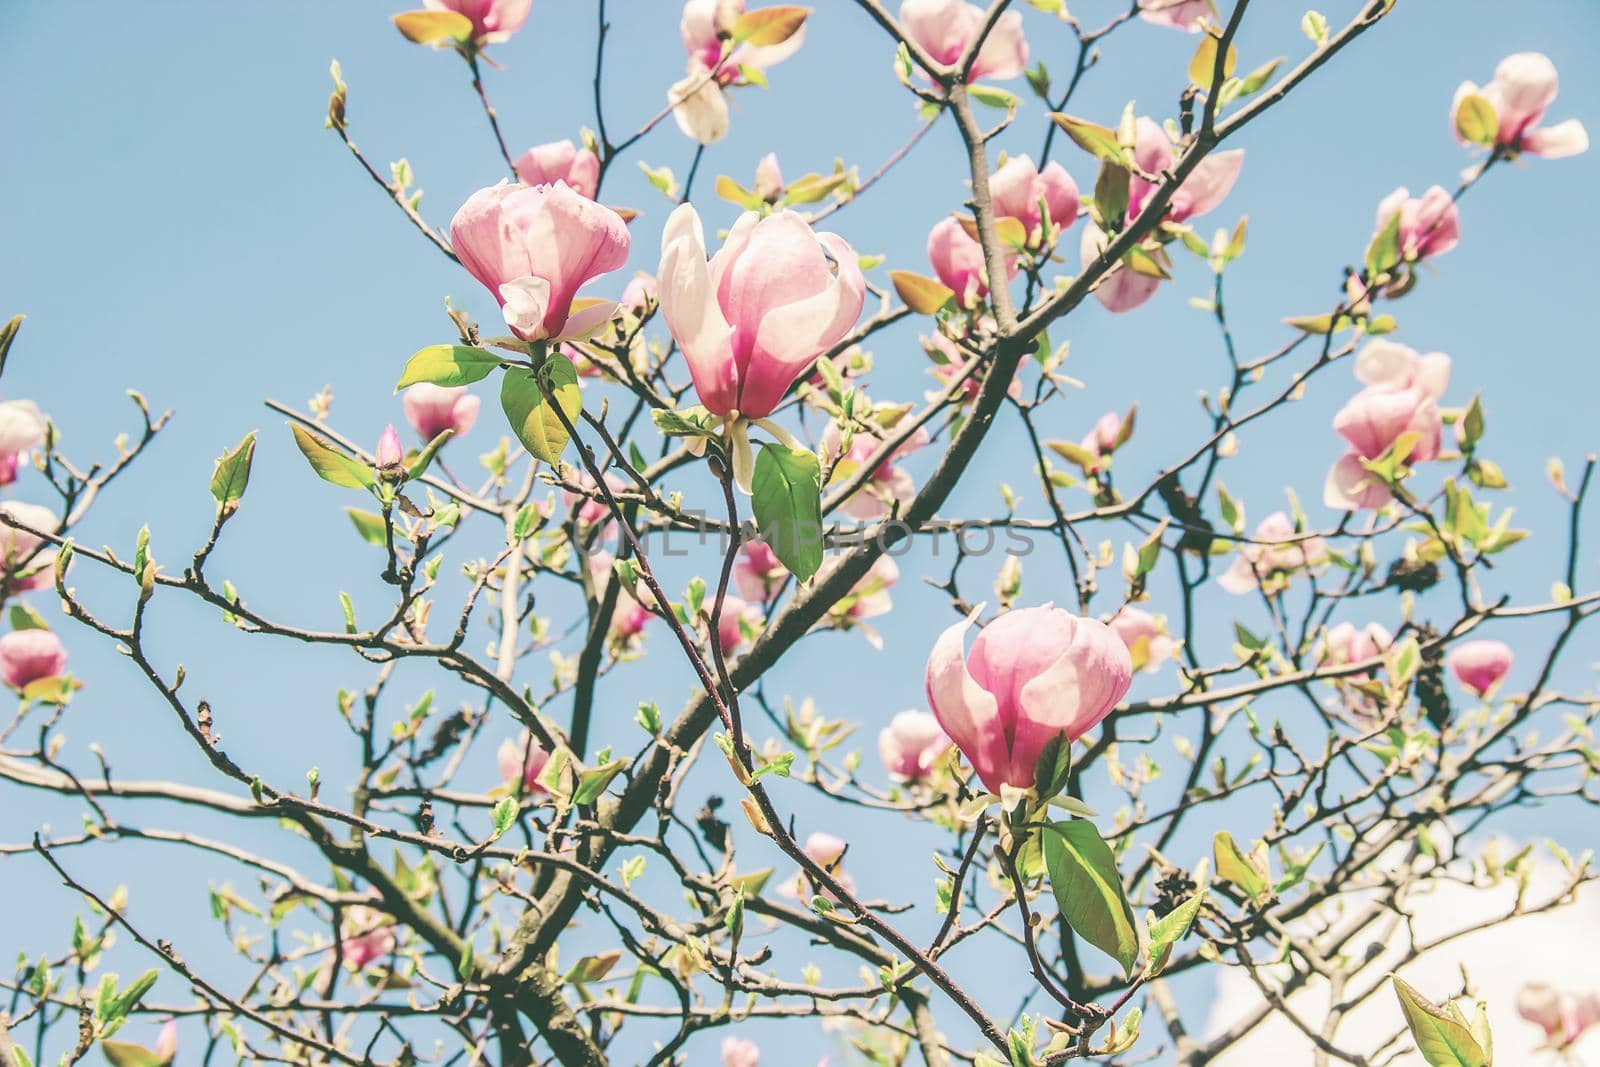 background of blooming magnolias. Flowers. Selective focus nature